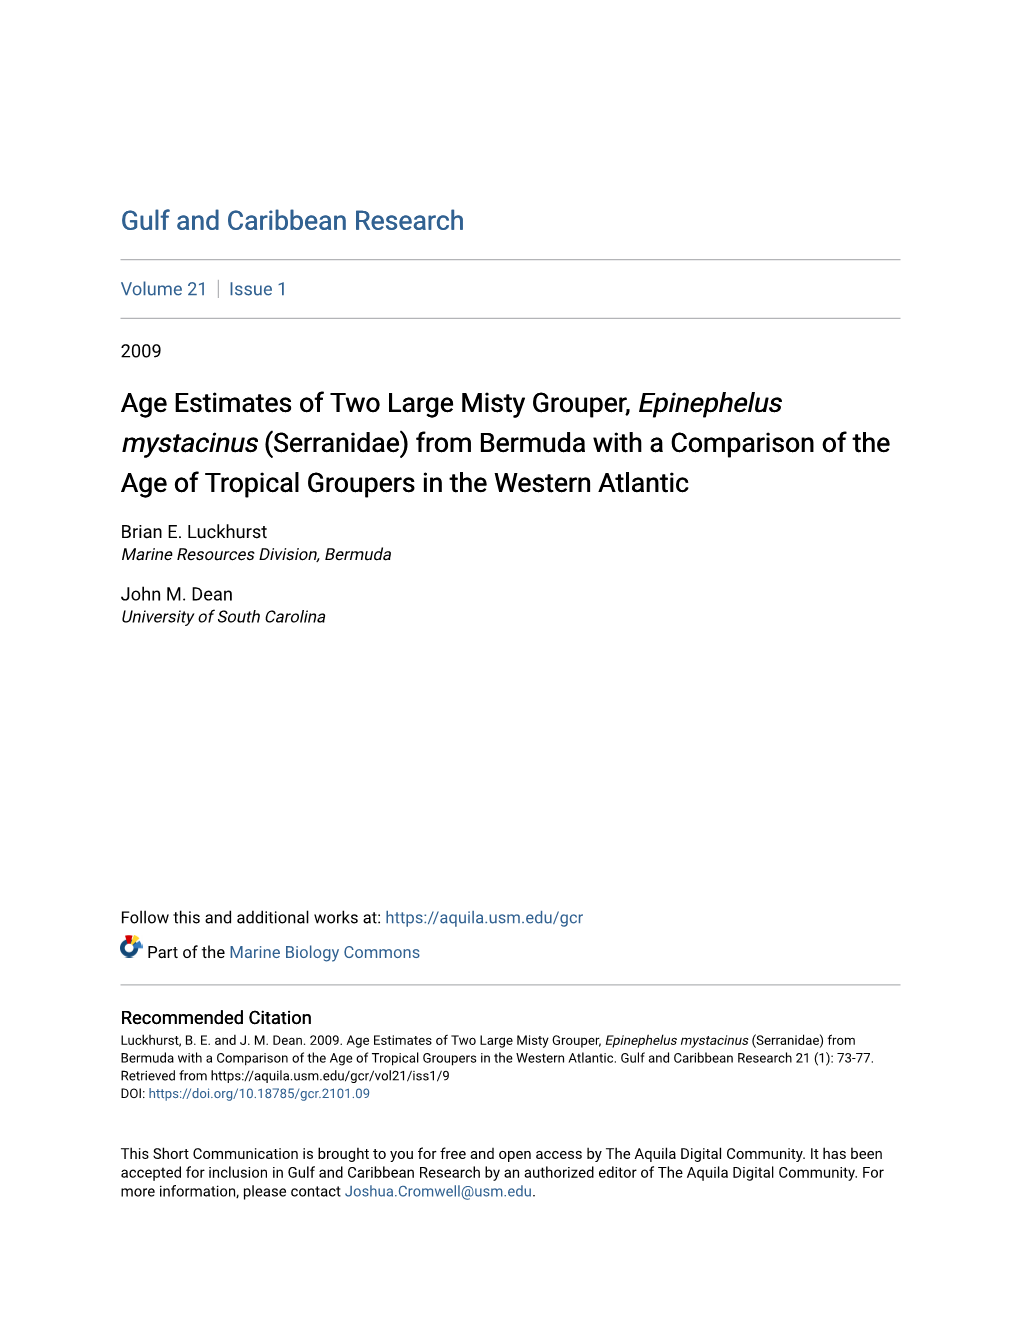 Age Estimates of Two Large Misty Grouper, Epinephelus Mystacinus (Serranidae) from Bermuda with a Comparison of the Age of Tropical Groupers in the Western Atlantic